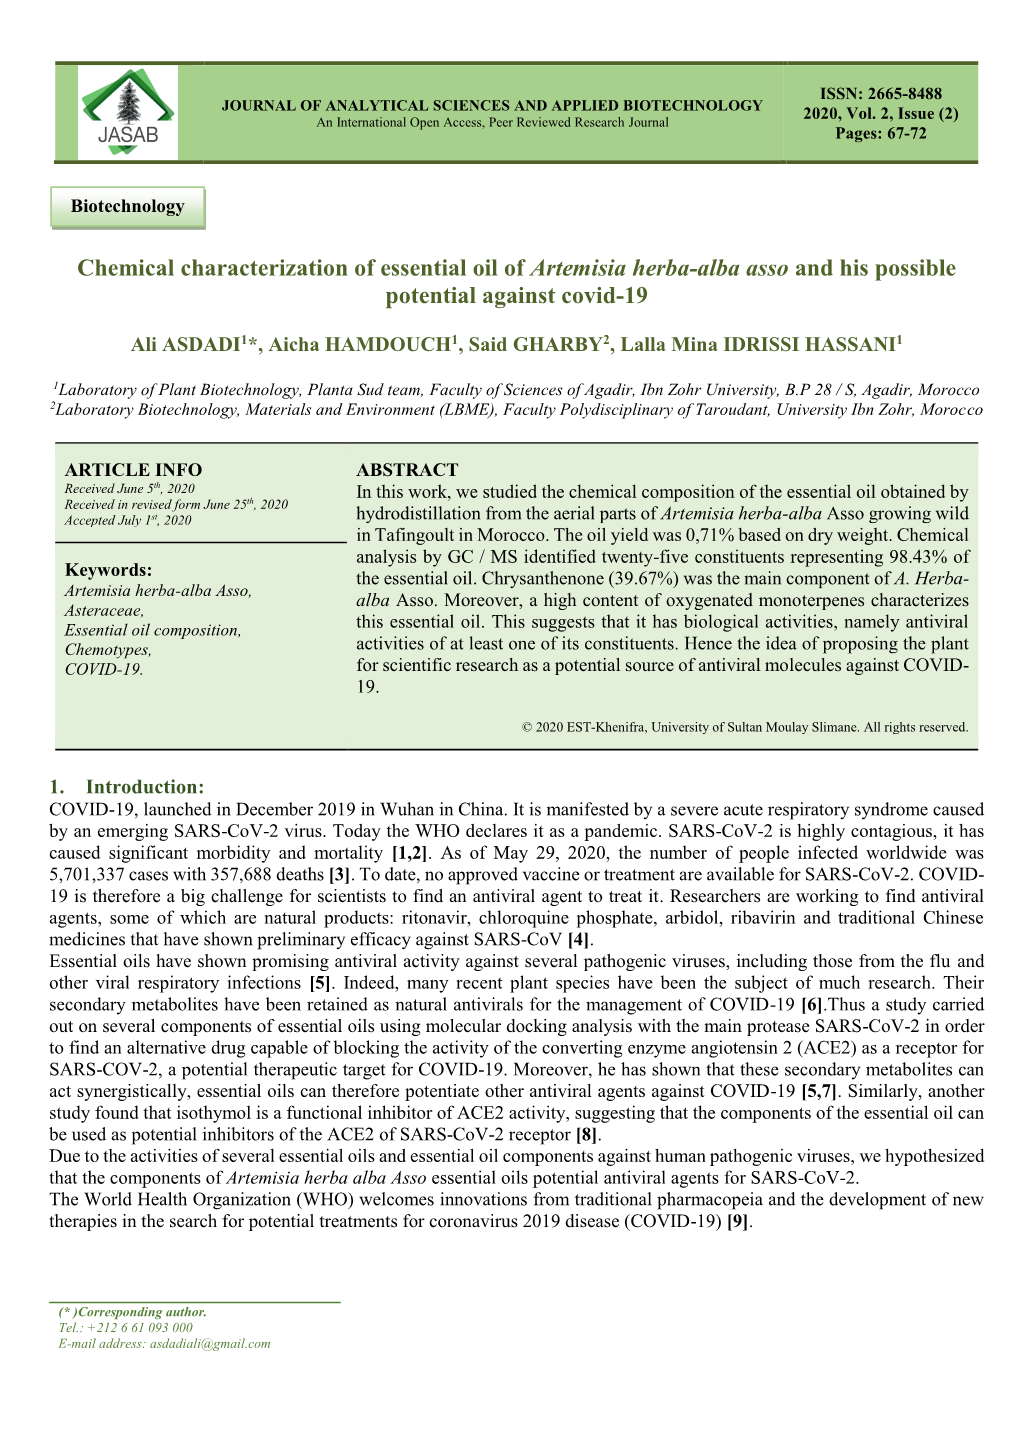 Chemical Characterization of Essential Oil of Artemisia Herba-Alba Asso and His Possible Potential Against Covid-19